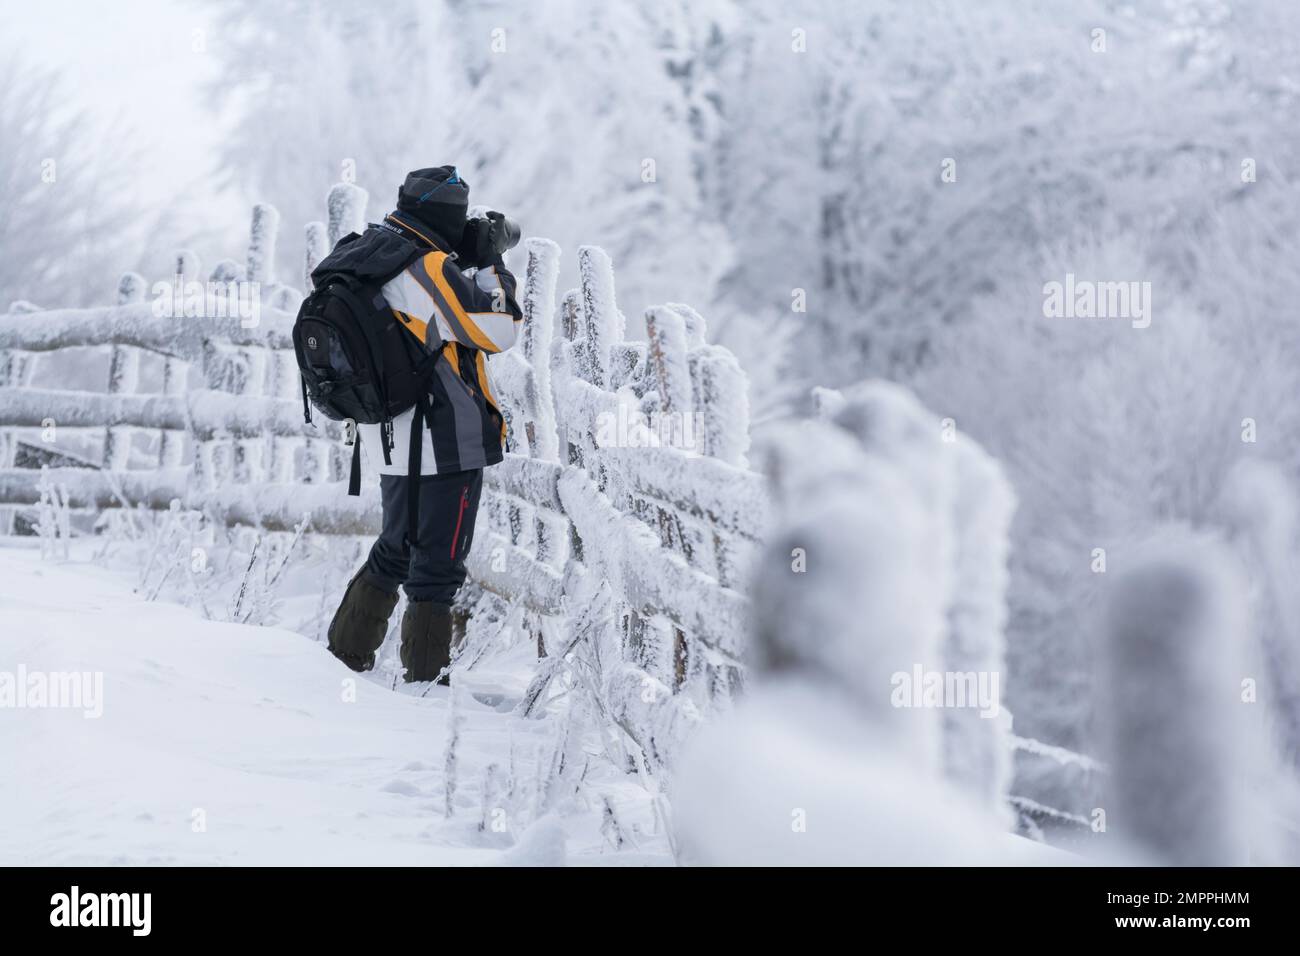 Photographer silhouette taking photos during winter time in a frosty landscape Stock Photo